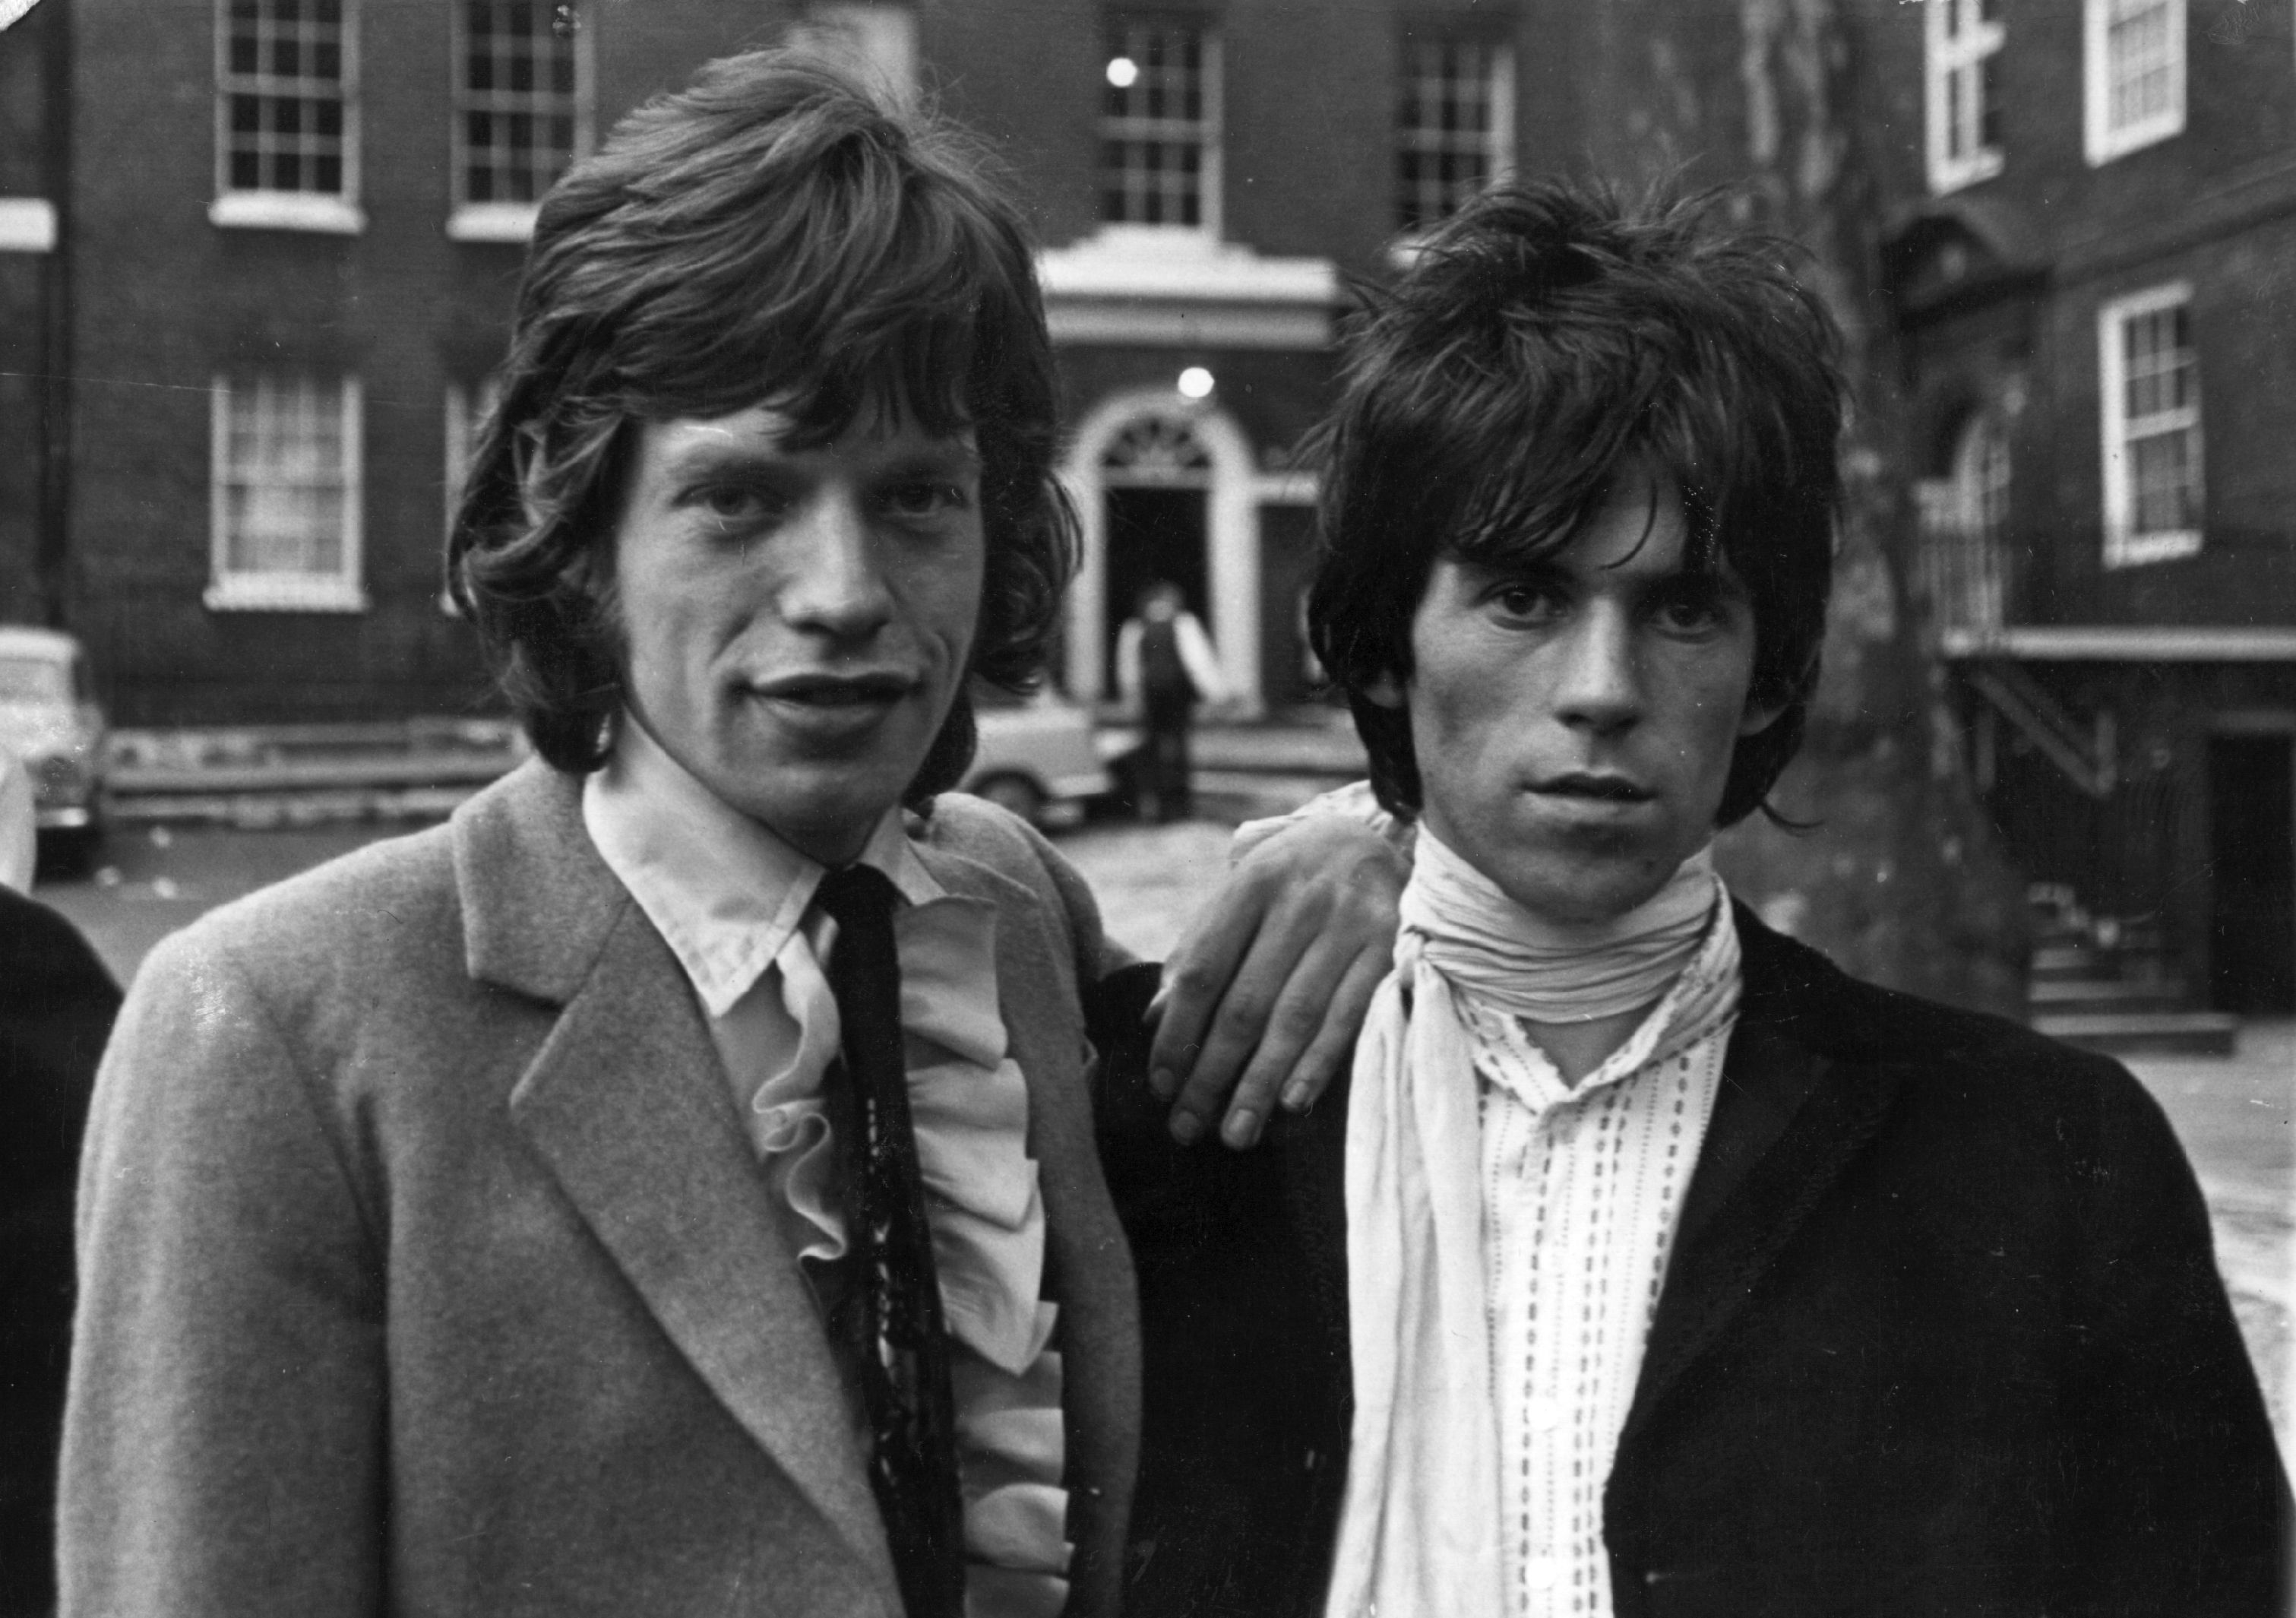 The Rolling Stones' Mick Jagger and Keith Richards in black-and-white